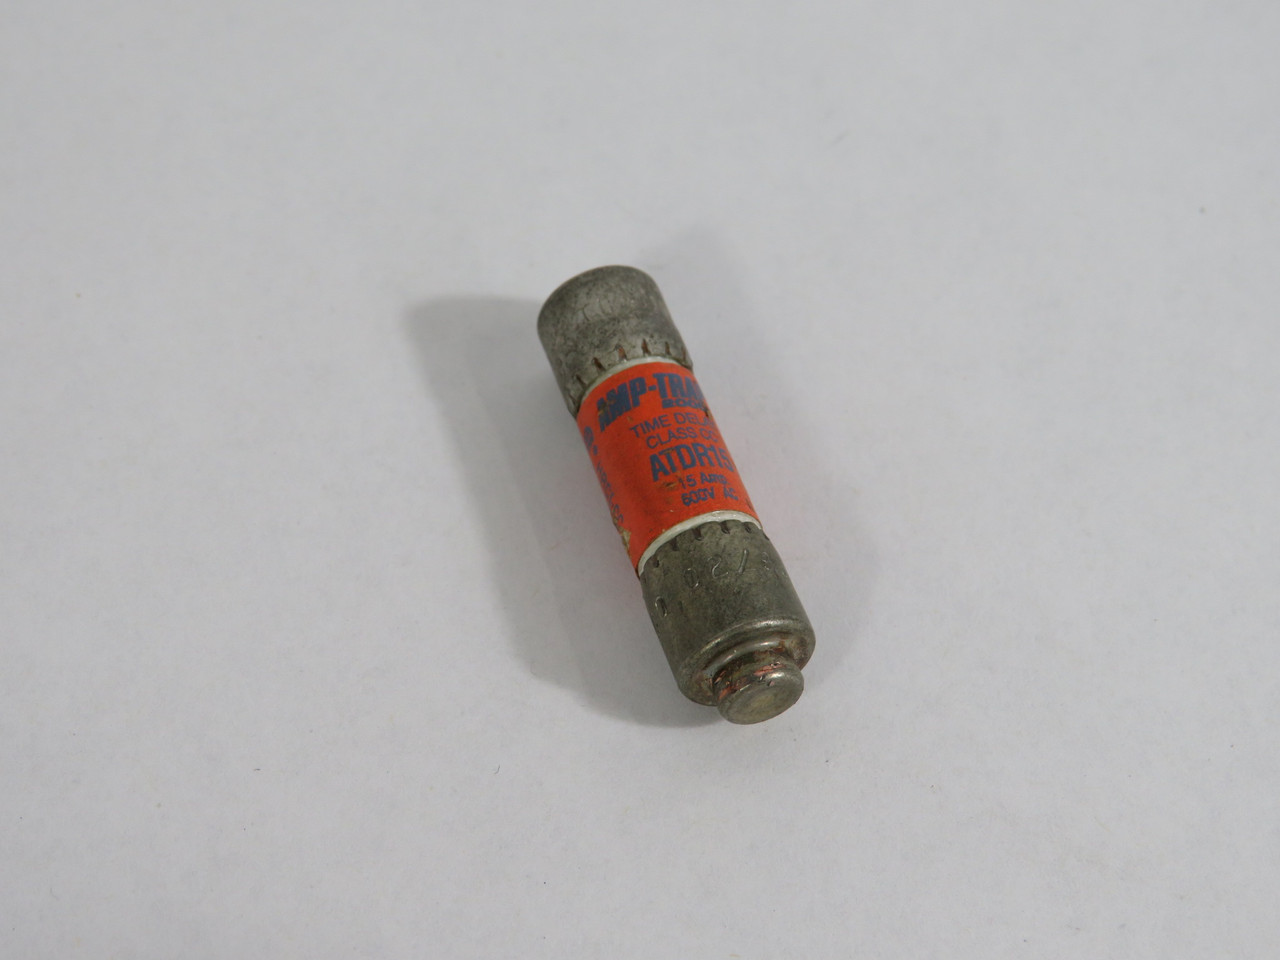 Gould Shawmut ATDR15 Time Delay Fuse 15A 600VAC USED